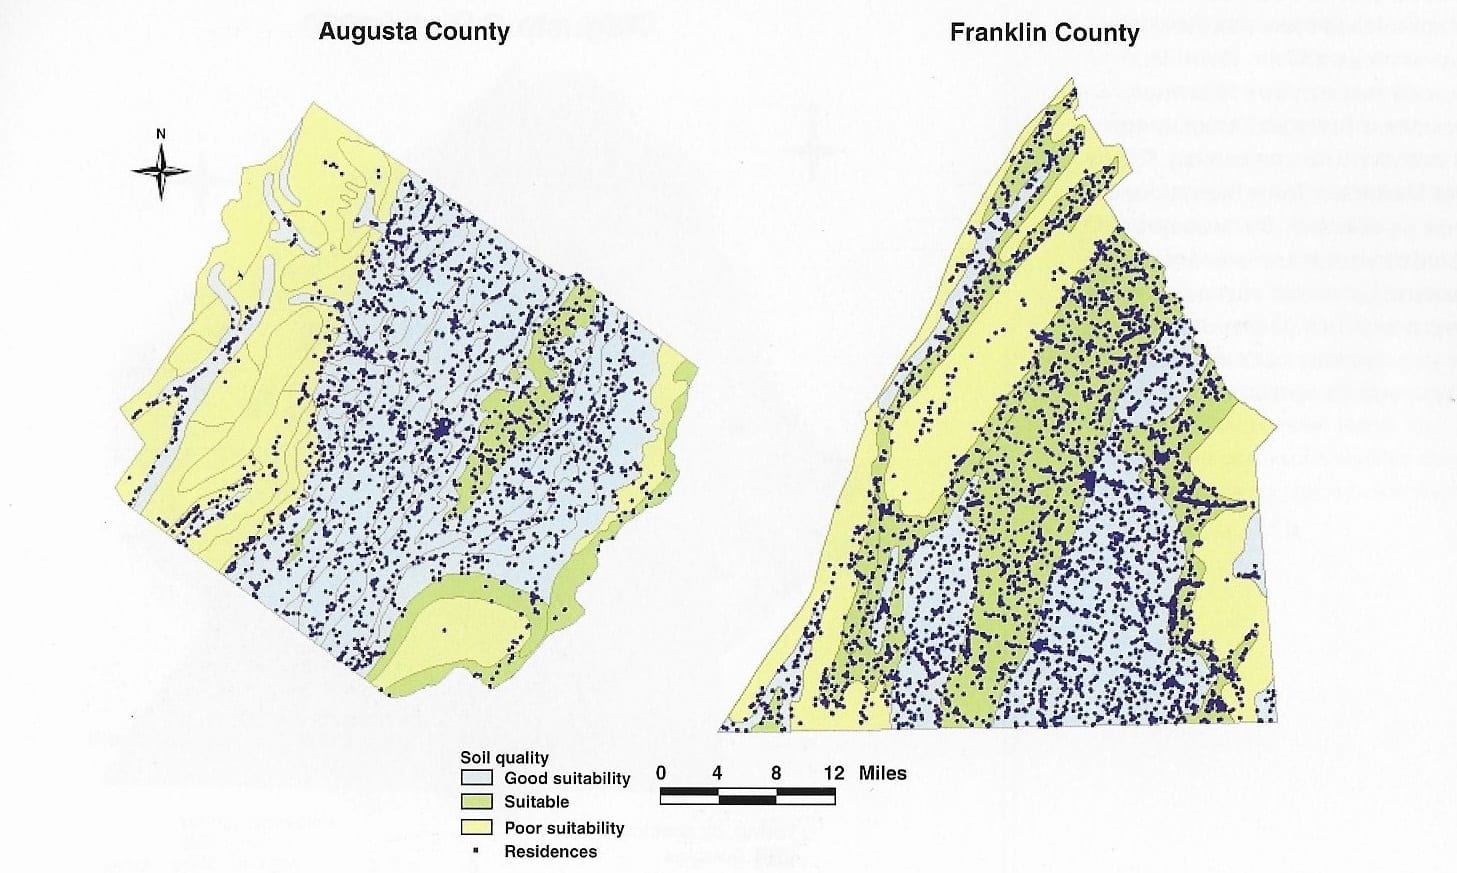 Franklin and Augusta County - Soil Quality